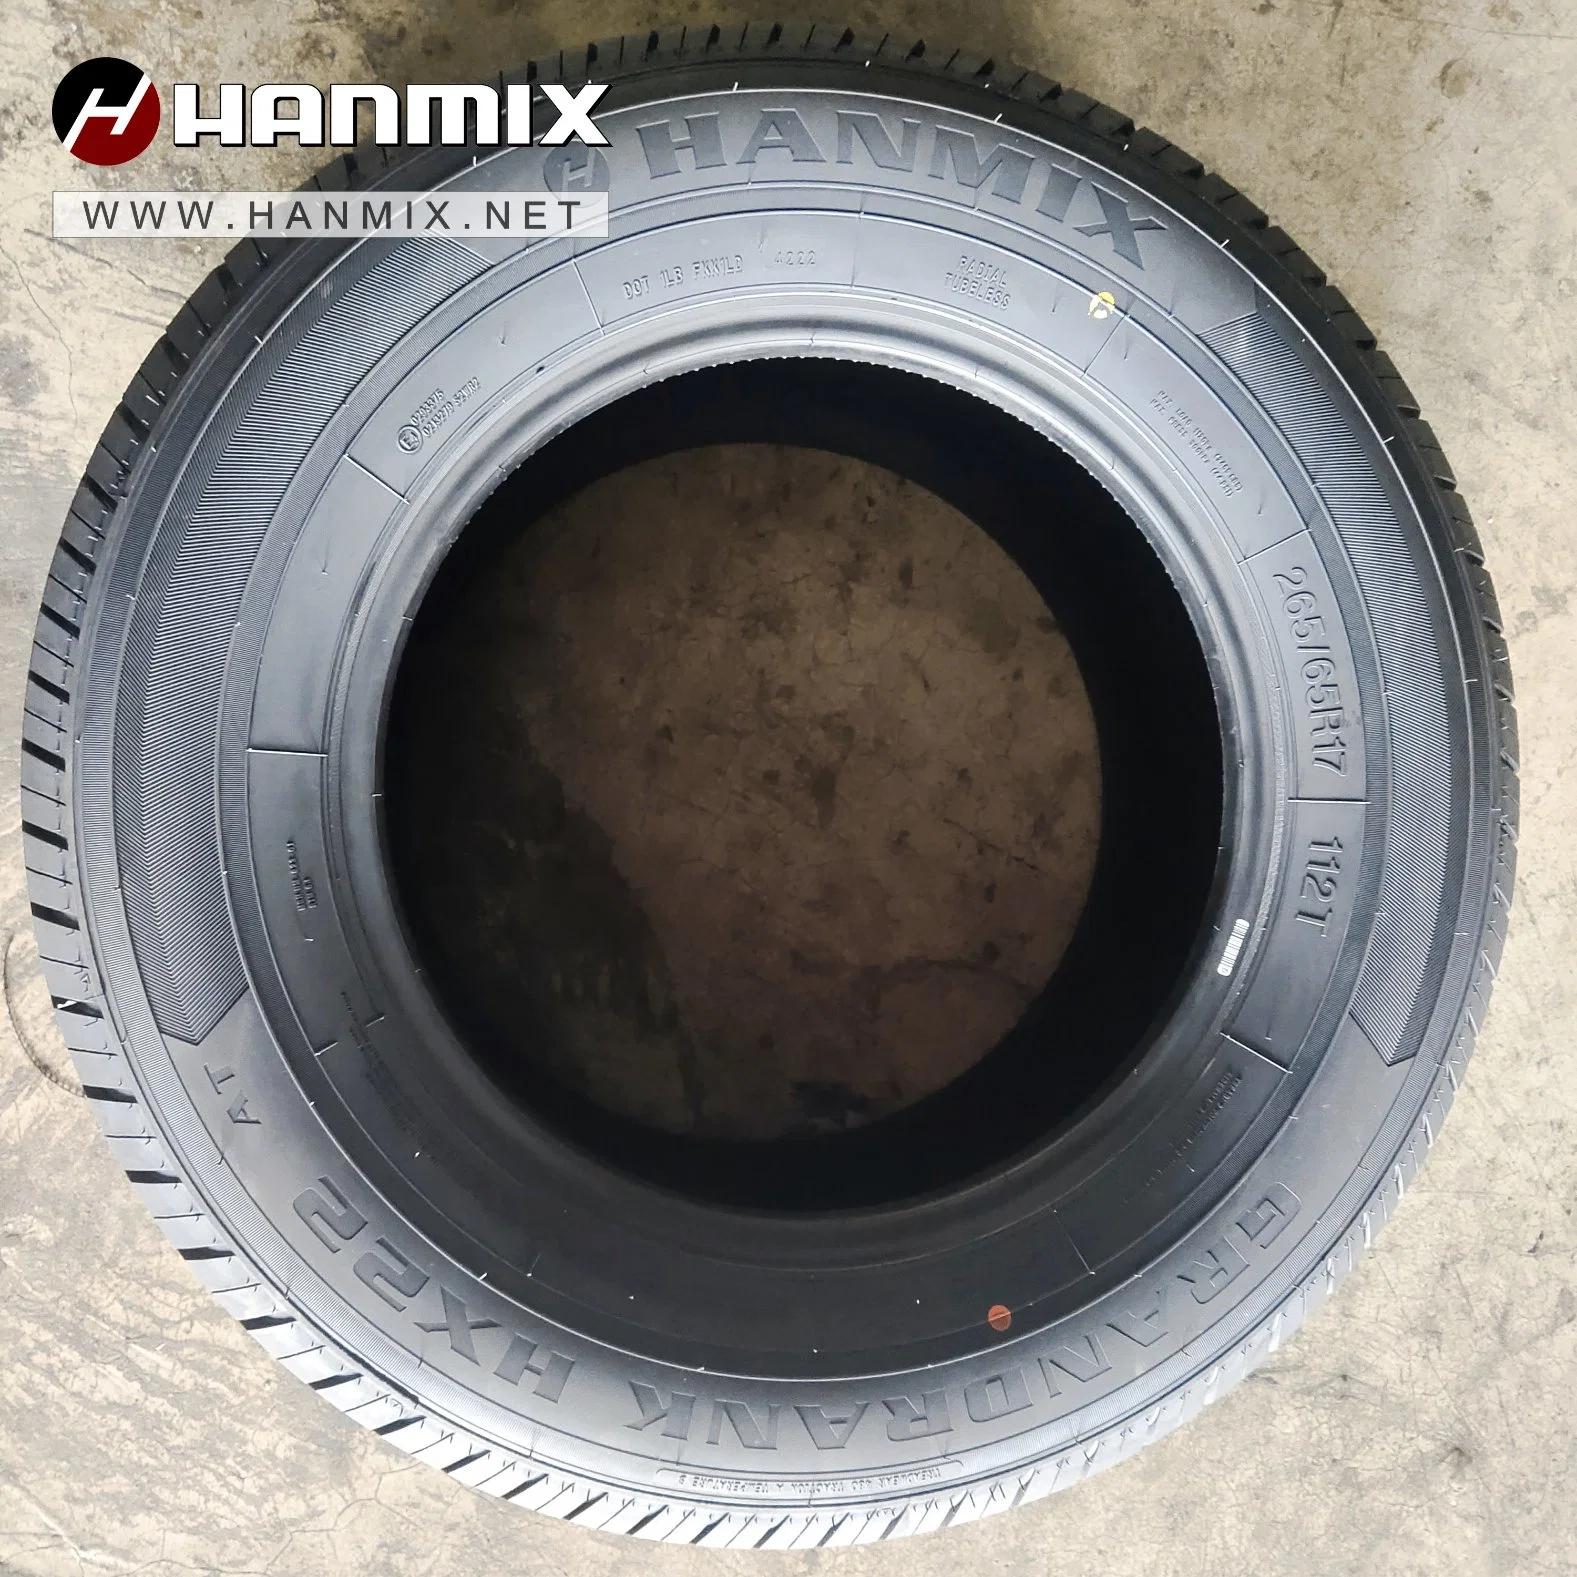 Hanmix Grandrank Hx22 PCR Tyres Radial Passenger Car All Terrain SUV Tire All Season Summer Straight-Line Weight-Carrying Tractive Grip265/70r16 275/70r16